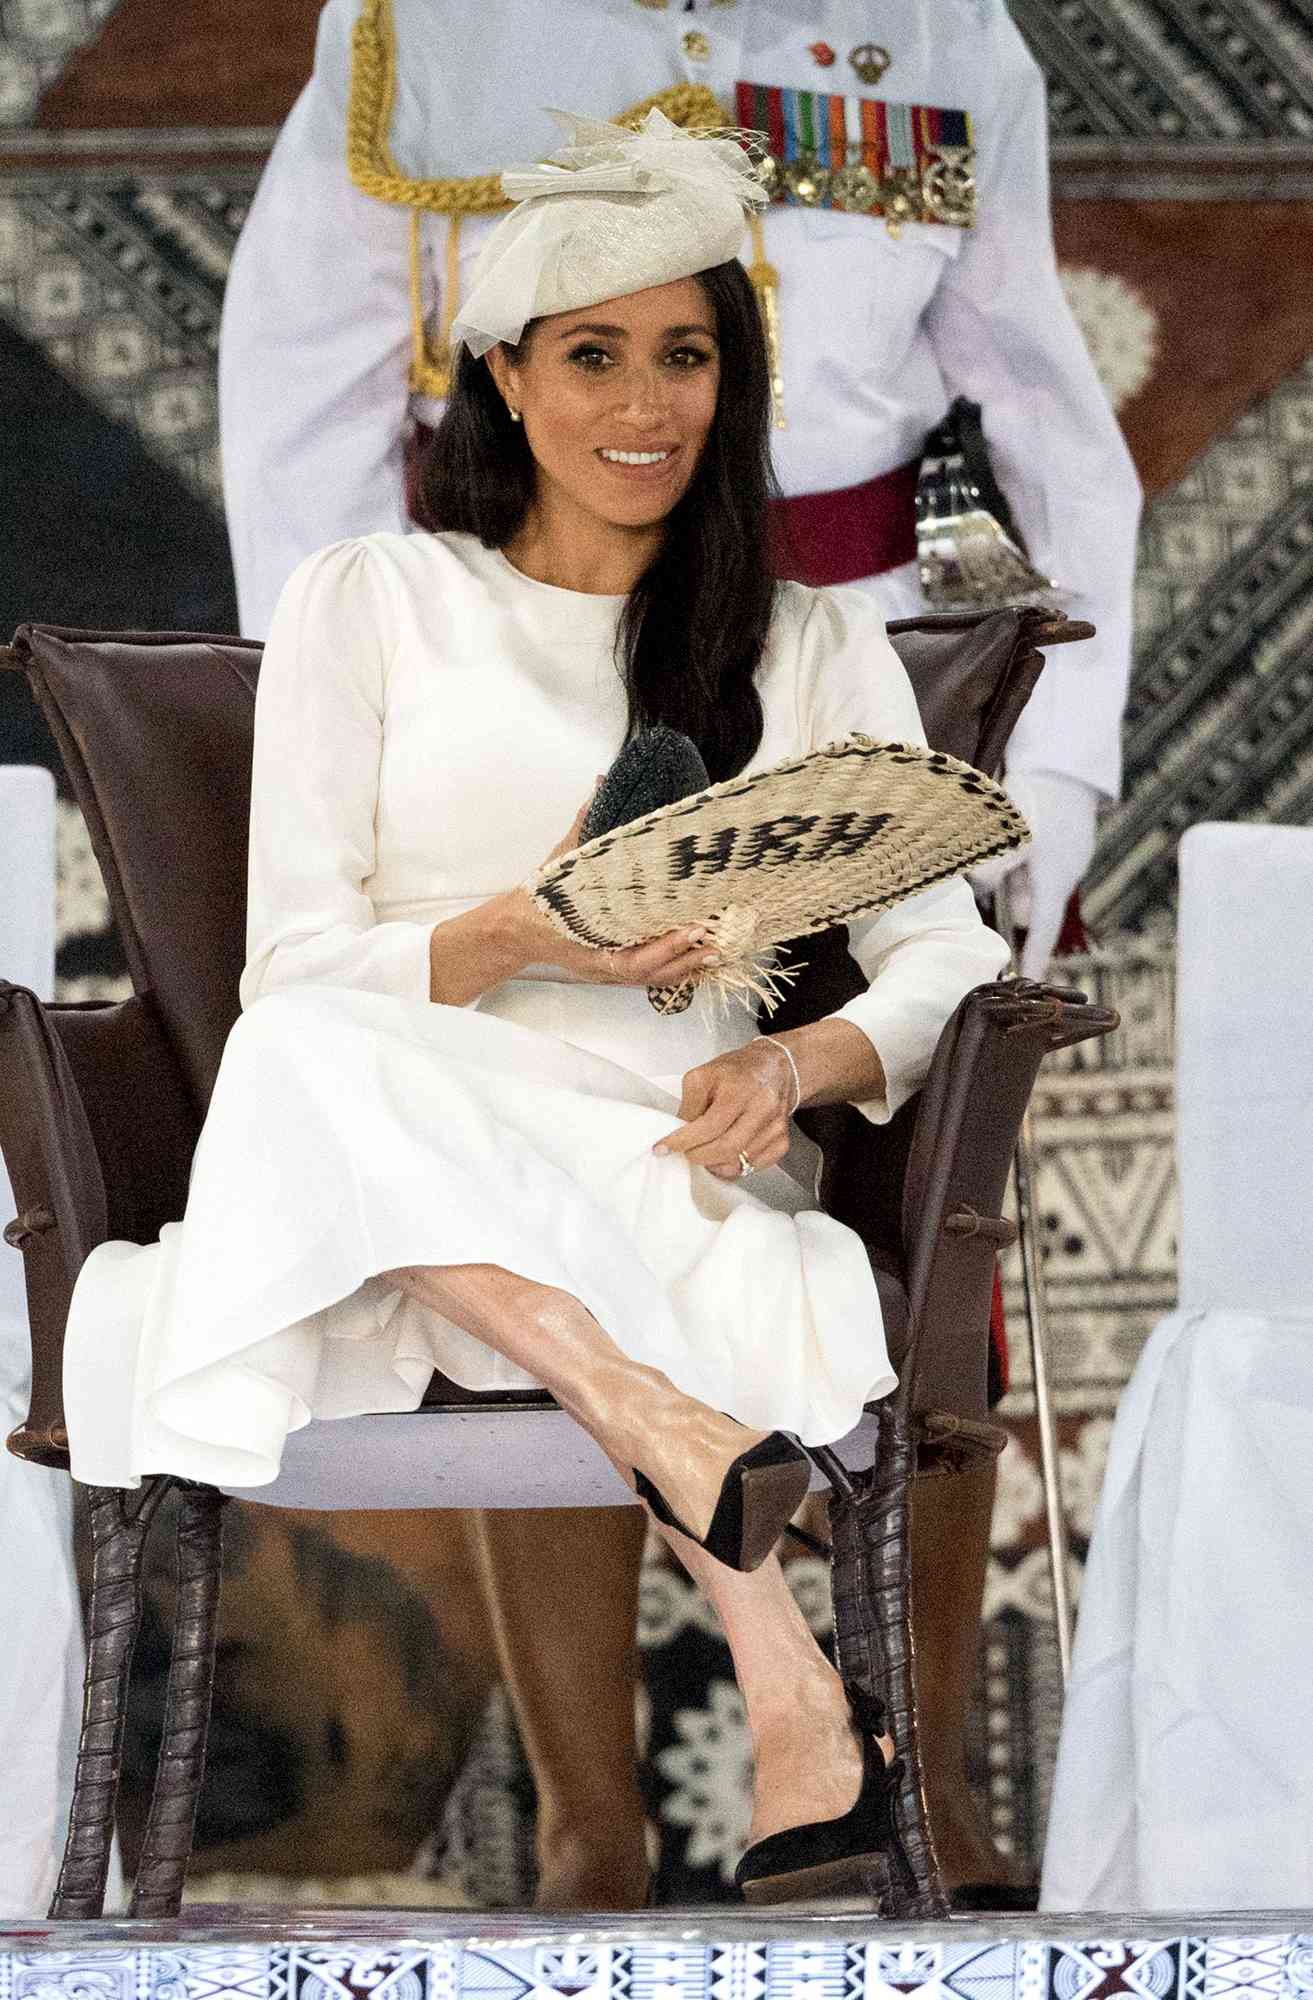 Prince Harry and Meghan Duchess of Sussex tour of Fiji - 23 Oct 2018